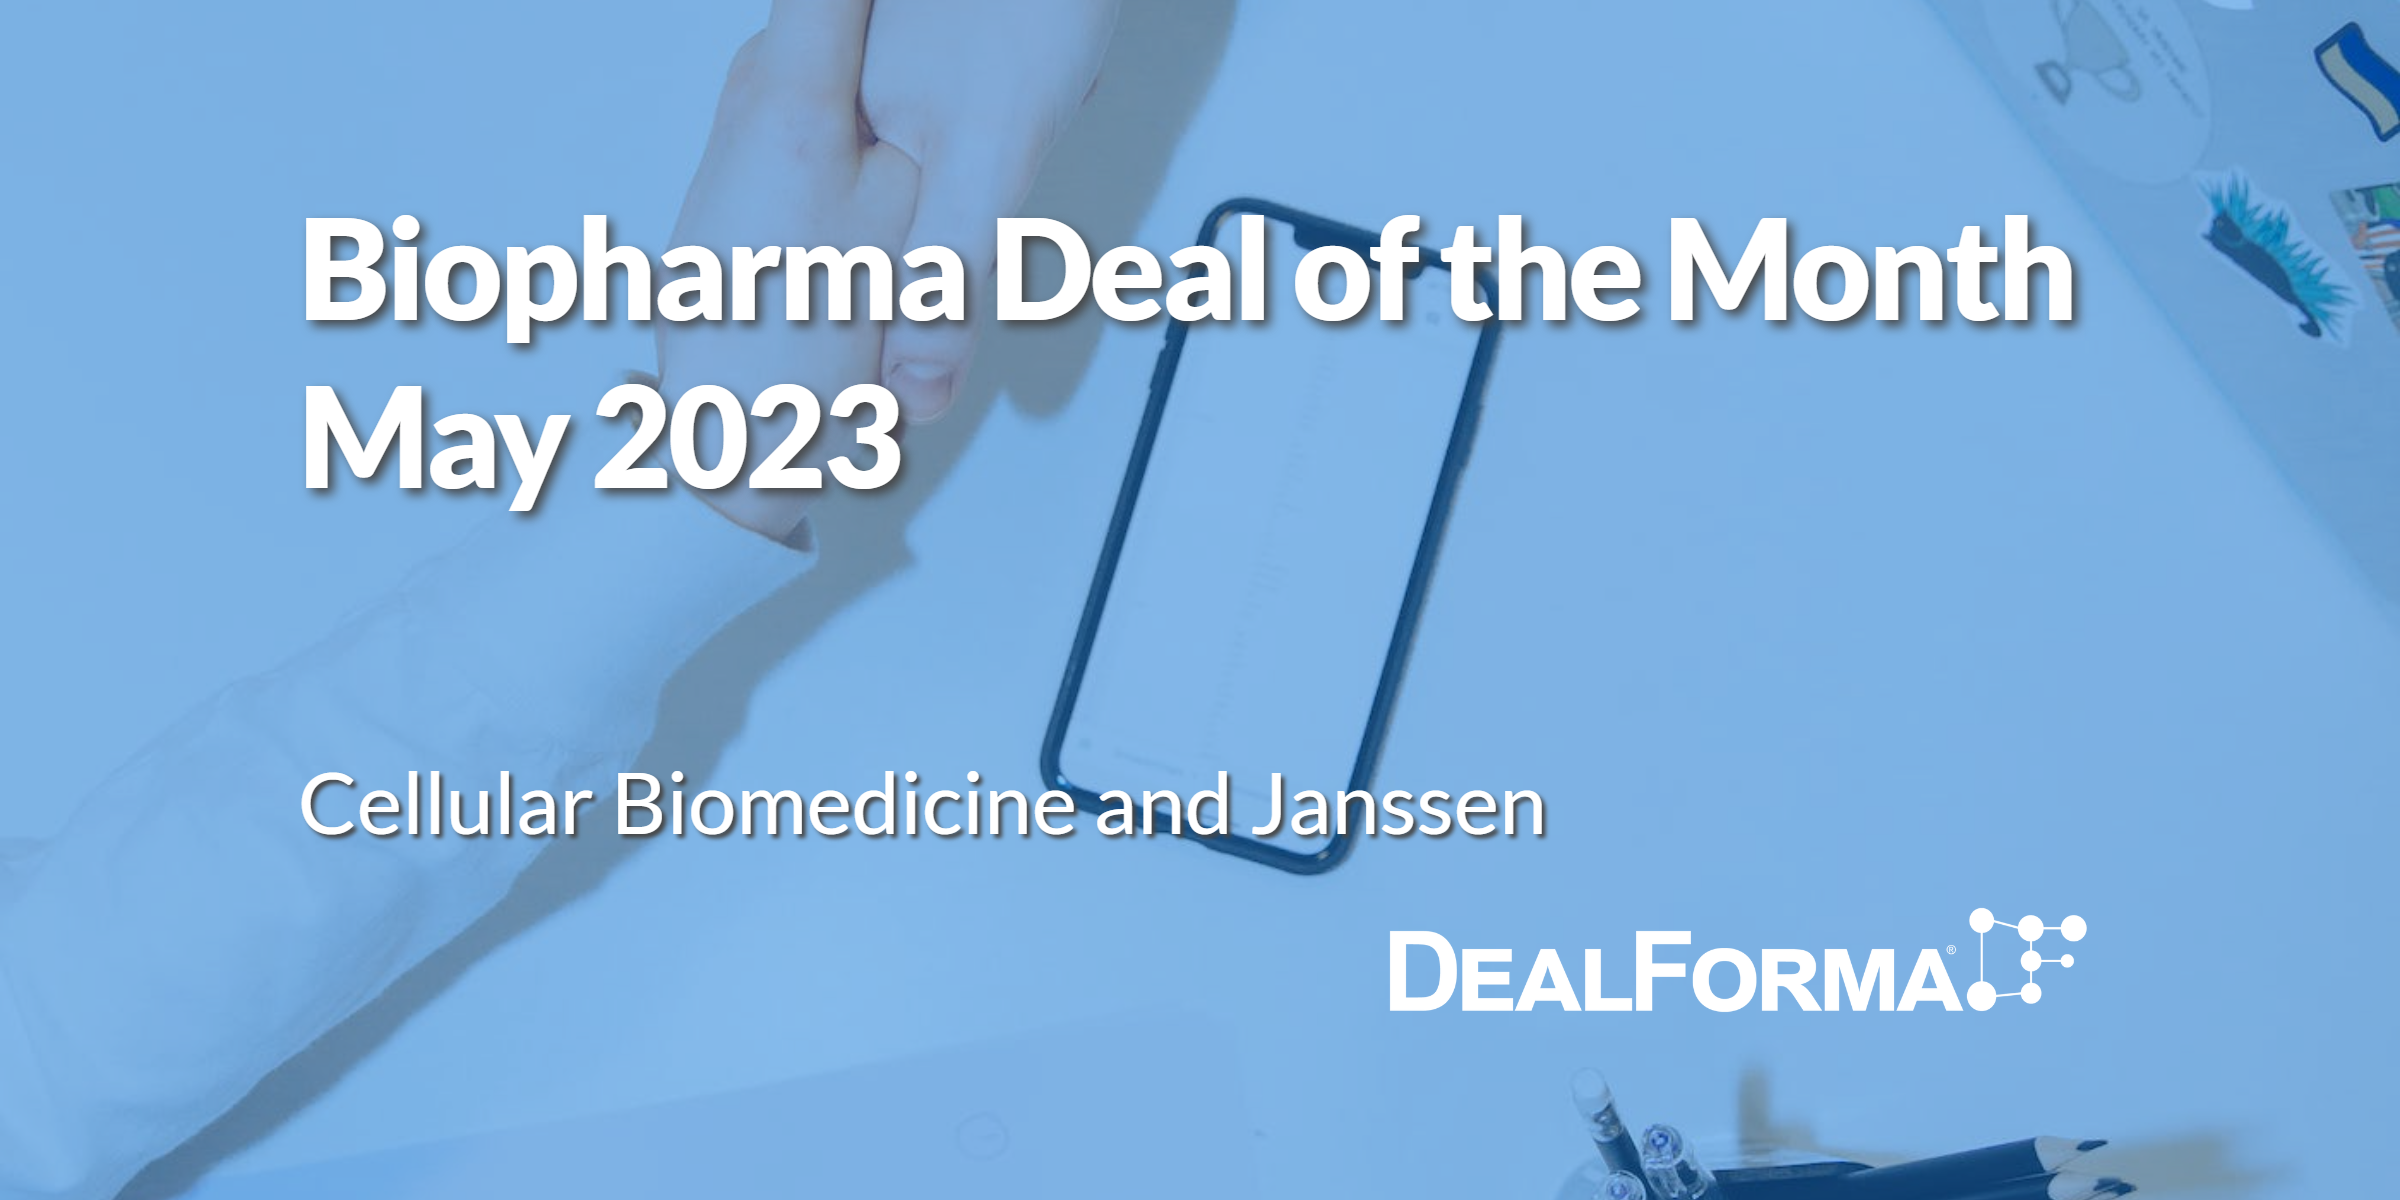 Biopharma Deal of the Month. Cellular Biomedicine and Janssen